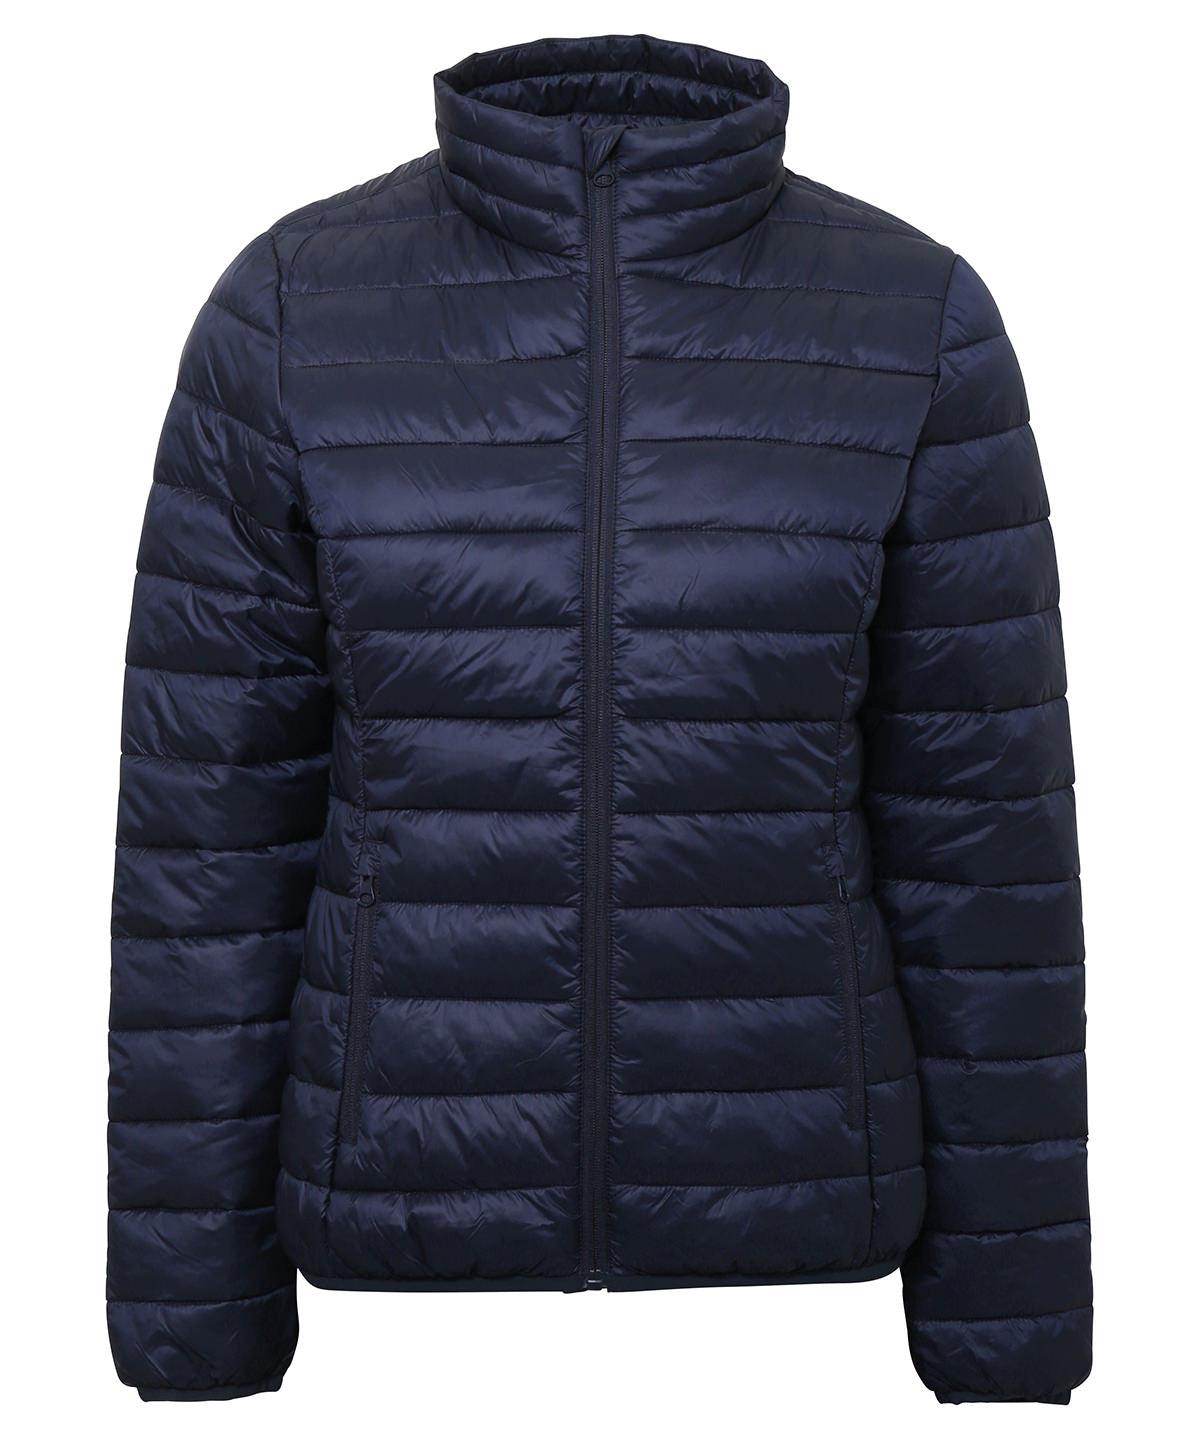 Navy - Women's terrain padded jacket Jackets 2786 Jackets & Coats, Must Haves, Padded & Insulation, Padded Perfection, Women's Fashion Schoolwear Centres